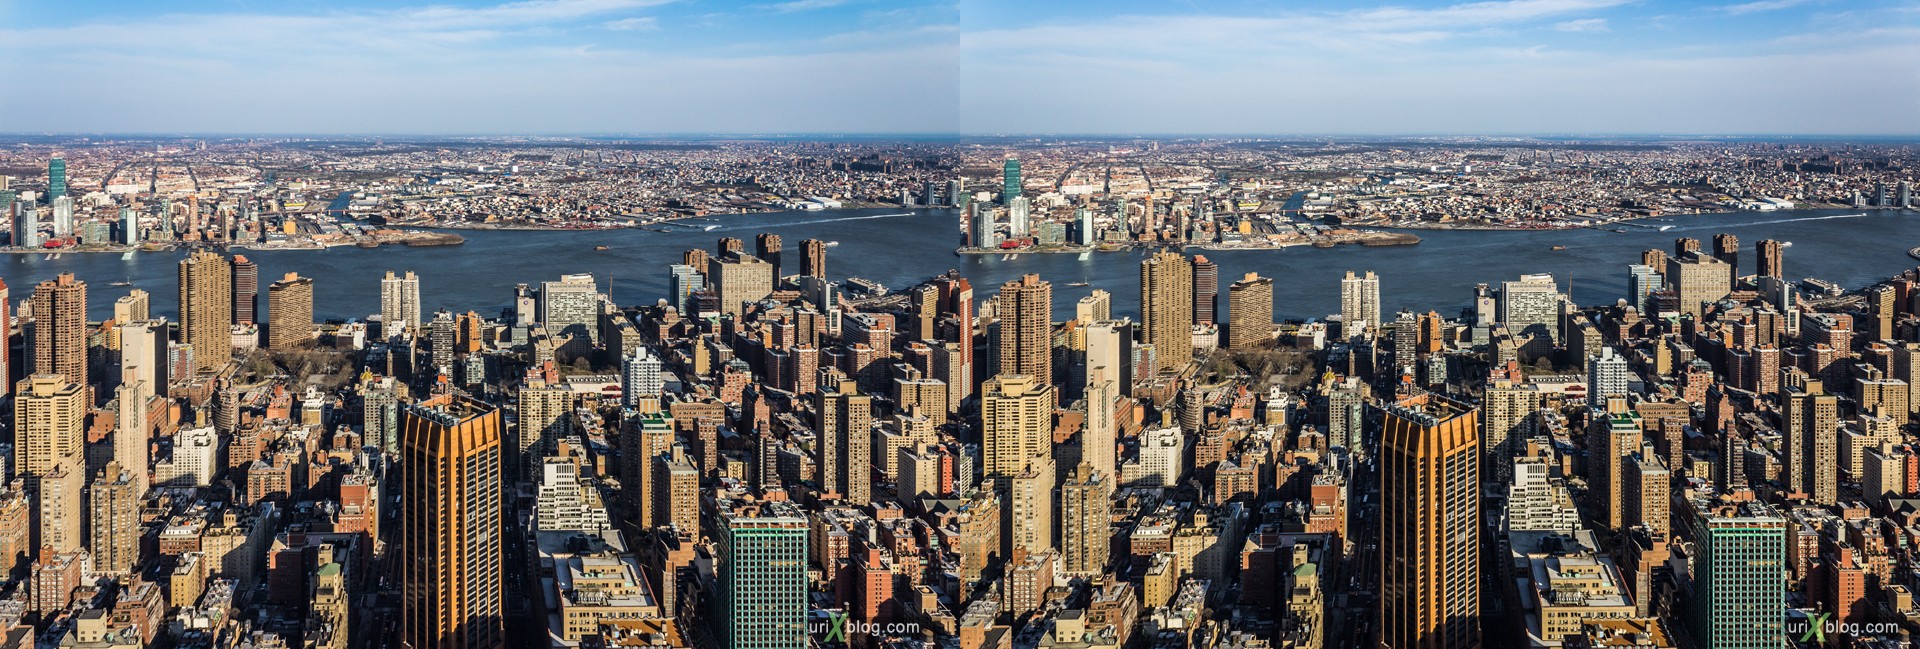 2013, NYC, New York, Manhattan, East River, Empire State Building, view from the top, city, building, skyscraper, panorama, 3D, stereo pair, cross-eyed, crossview, cross view stereo pair, stereoscopic